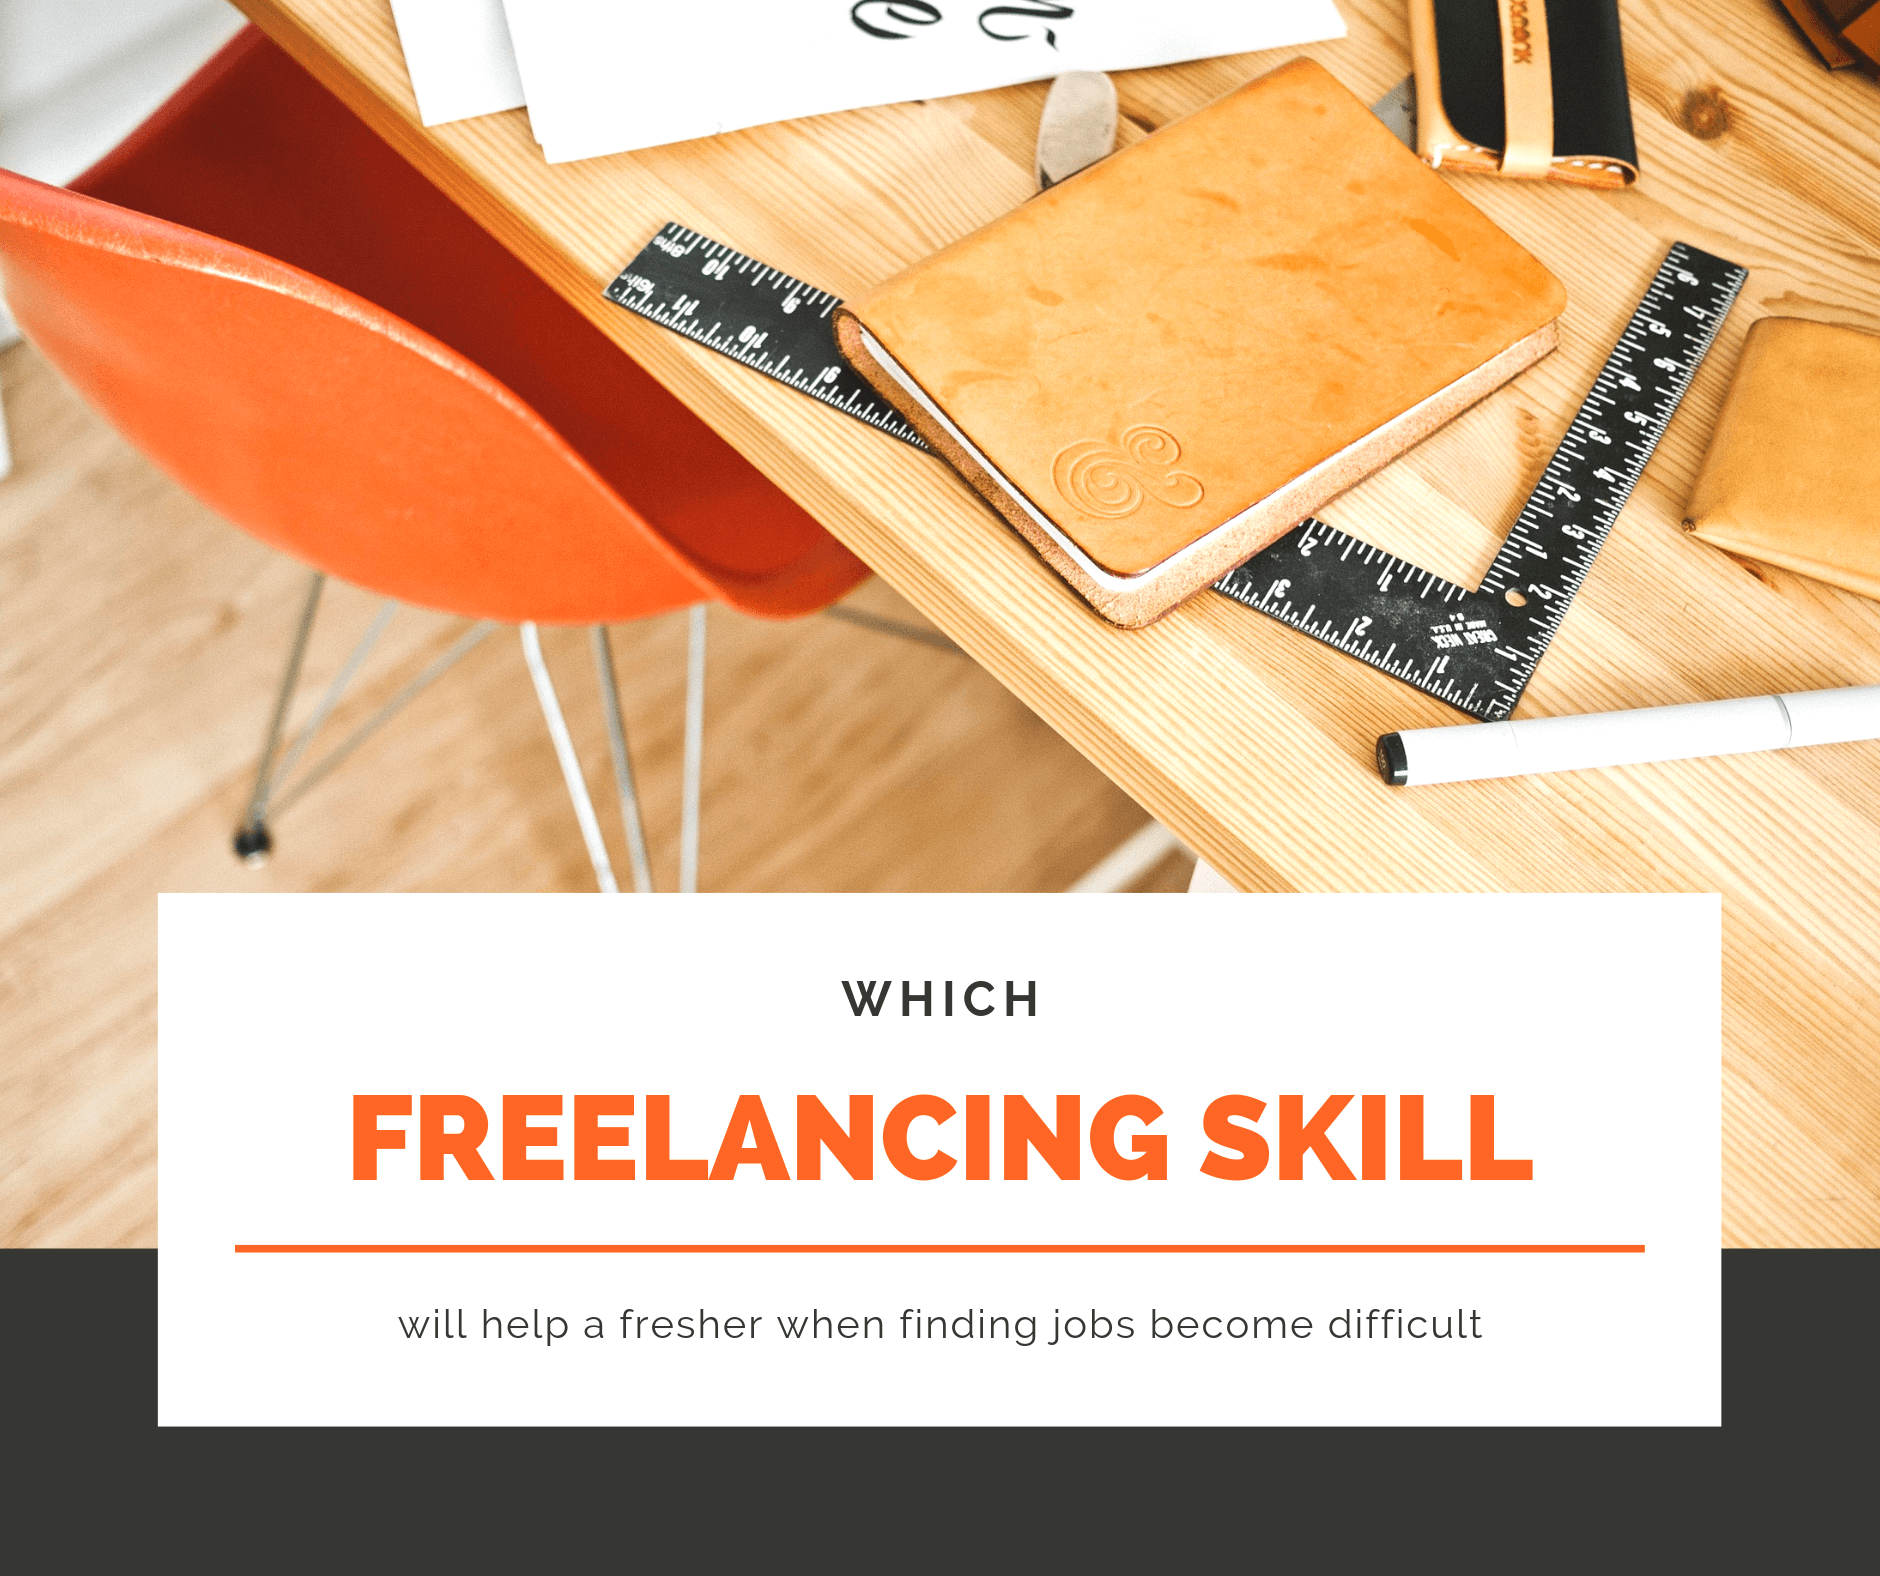 Which Freelancing Skill Will Help A Fresher When Finding Jobs Become Difficult